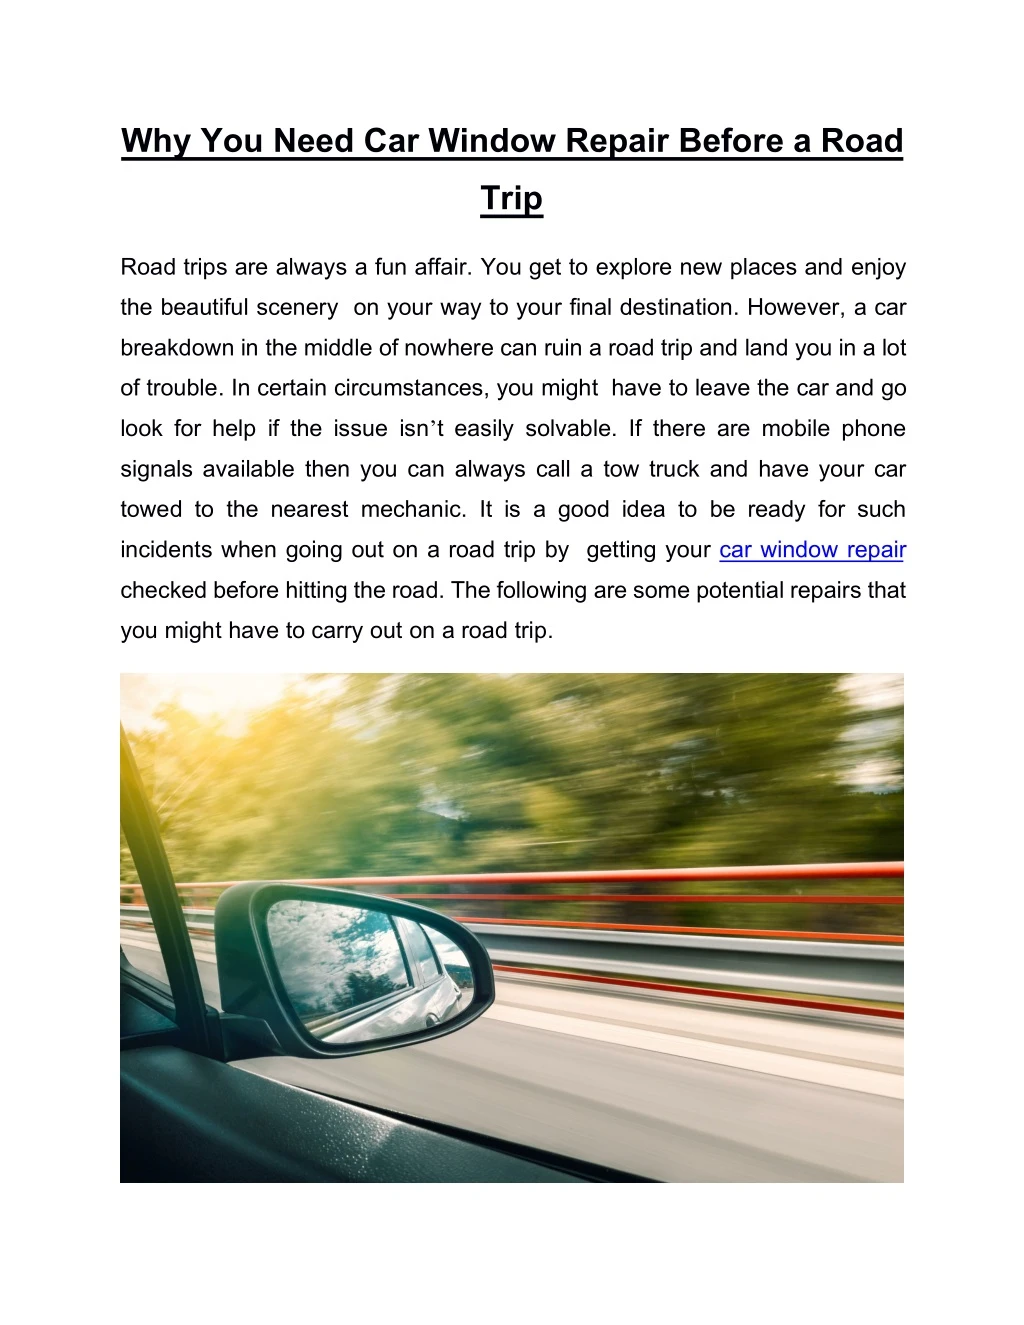 why you need car window repair before a road